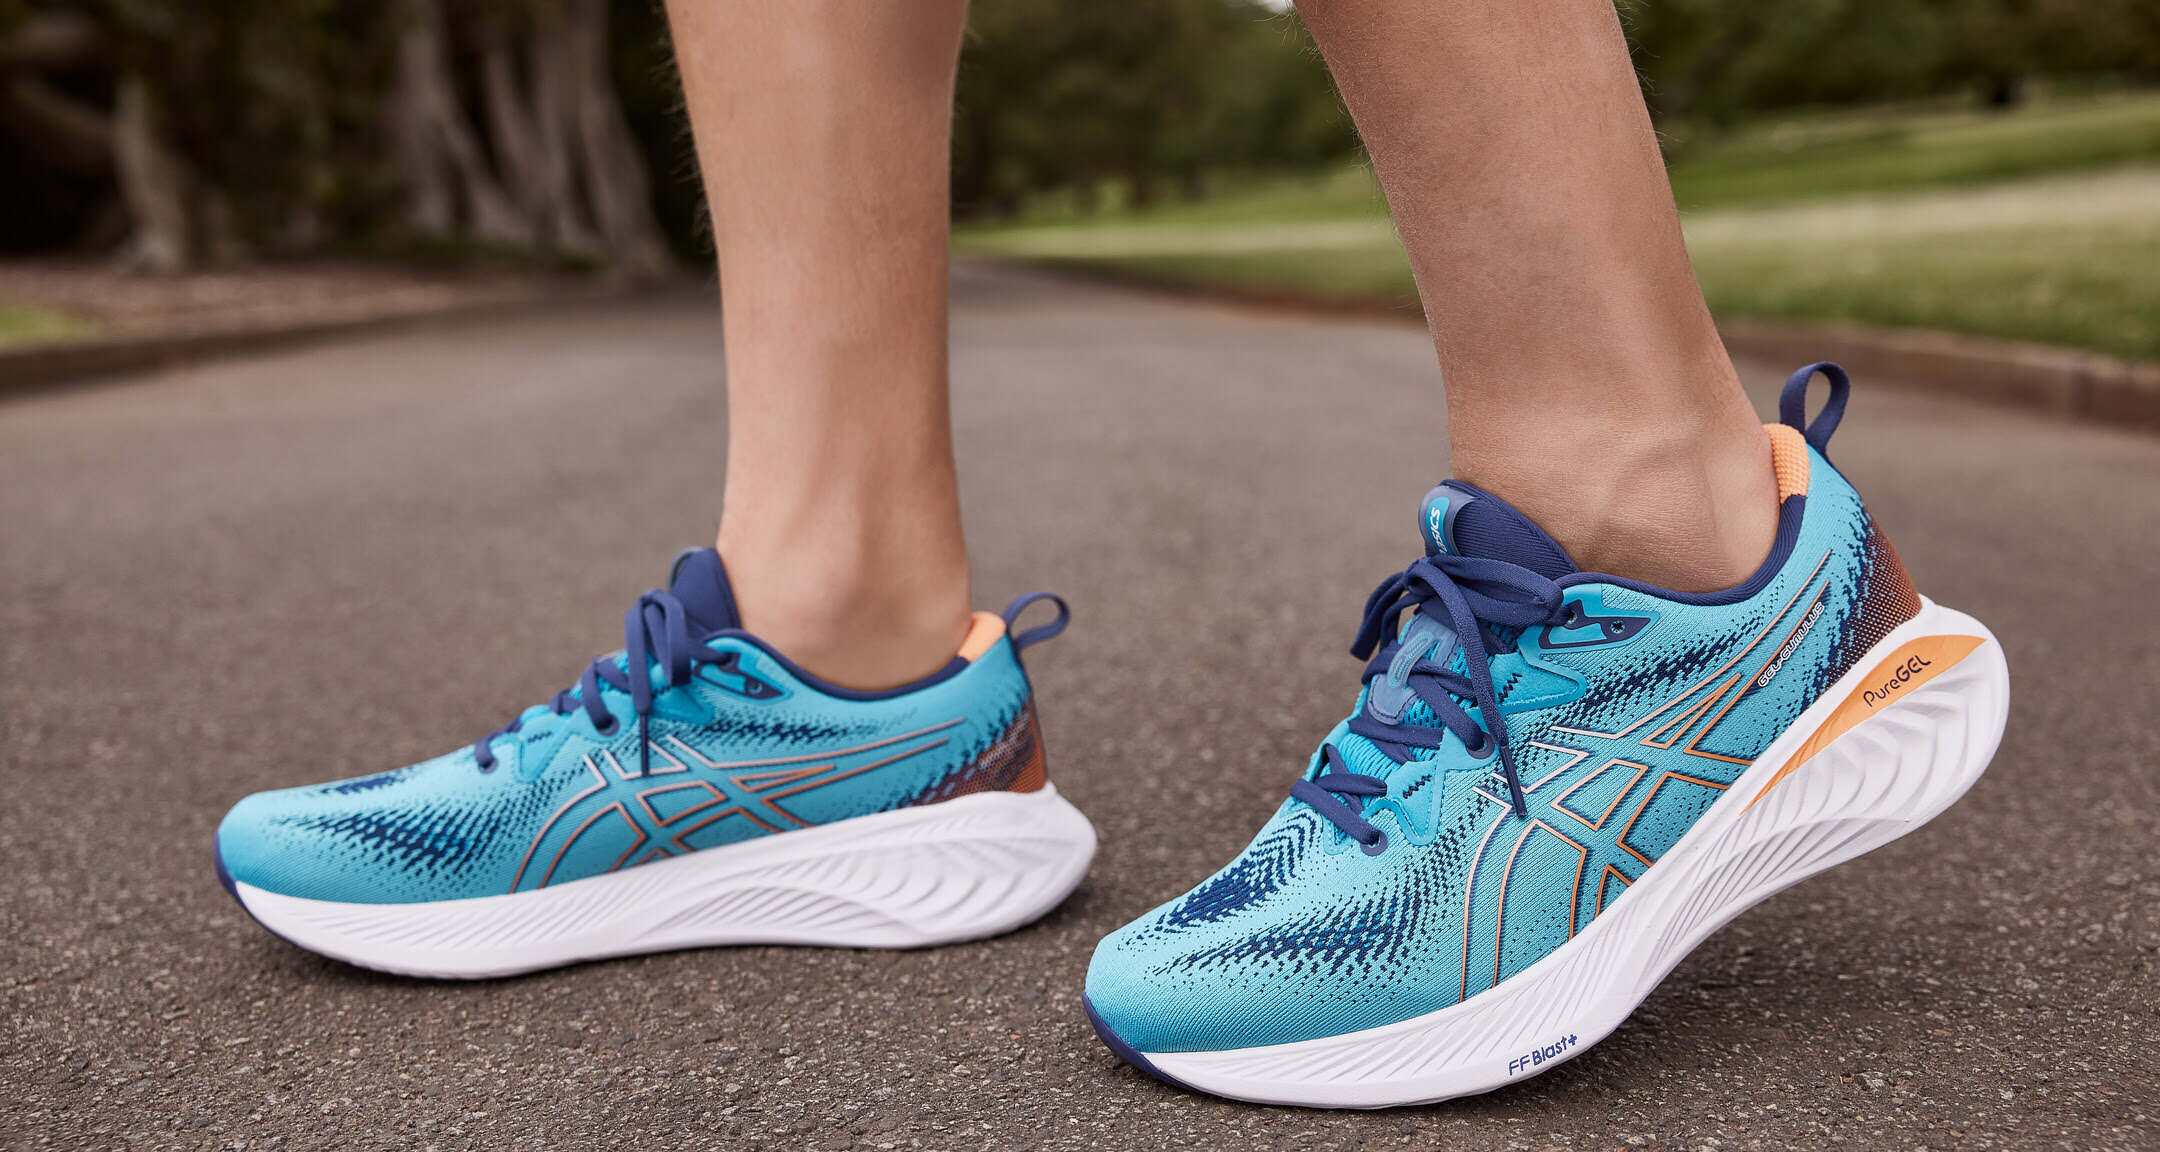 Best Running Shoes for Overpronation 2020 - Top 7 for Men and Women